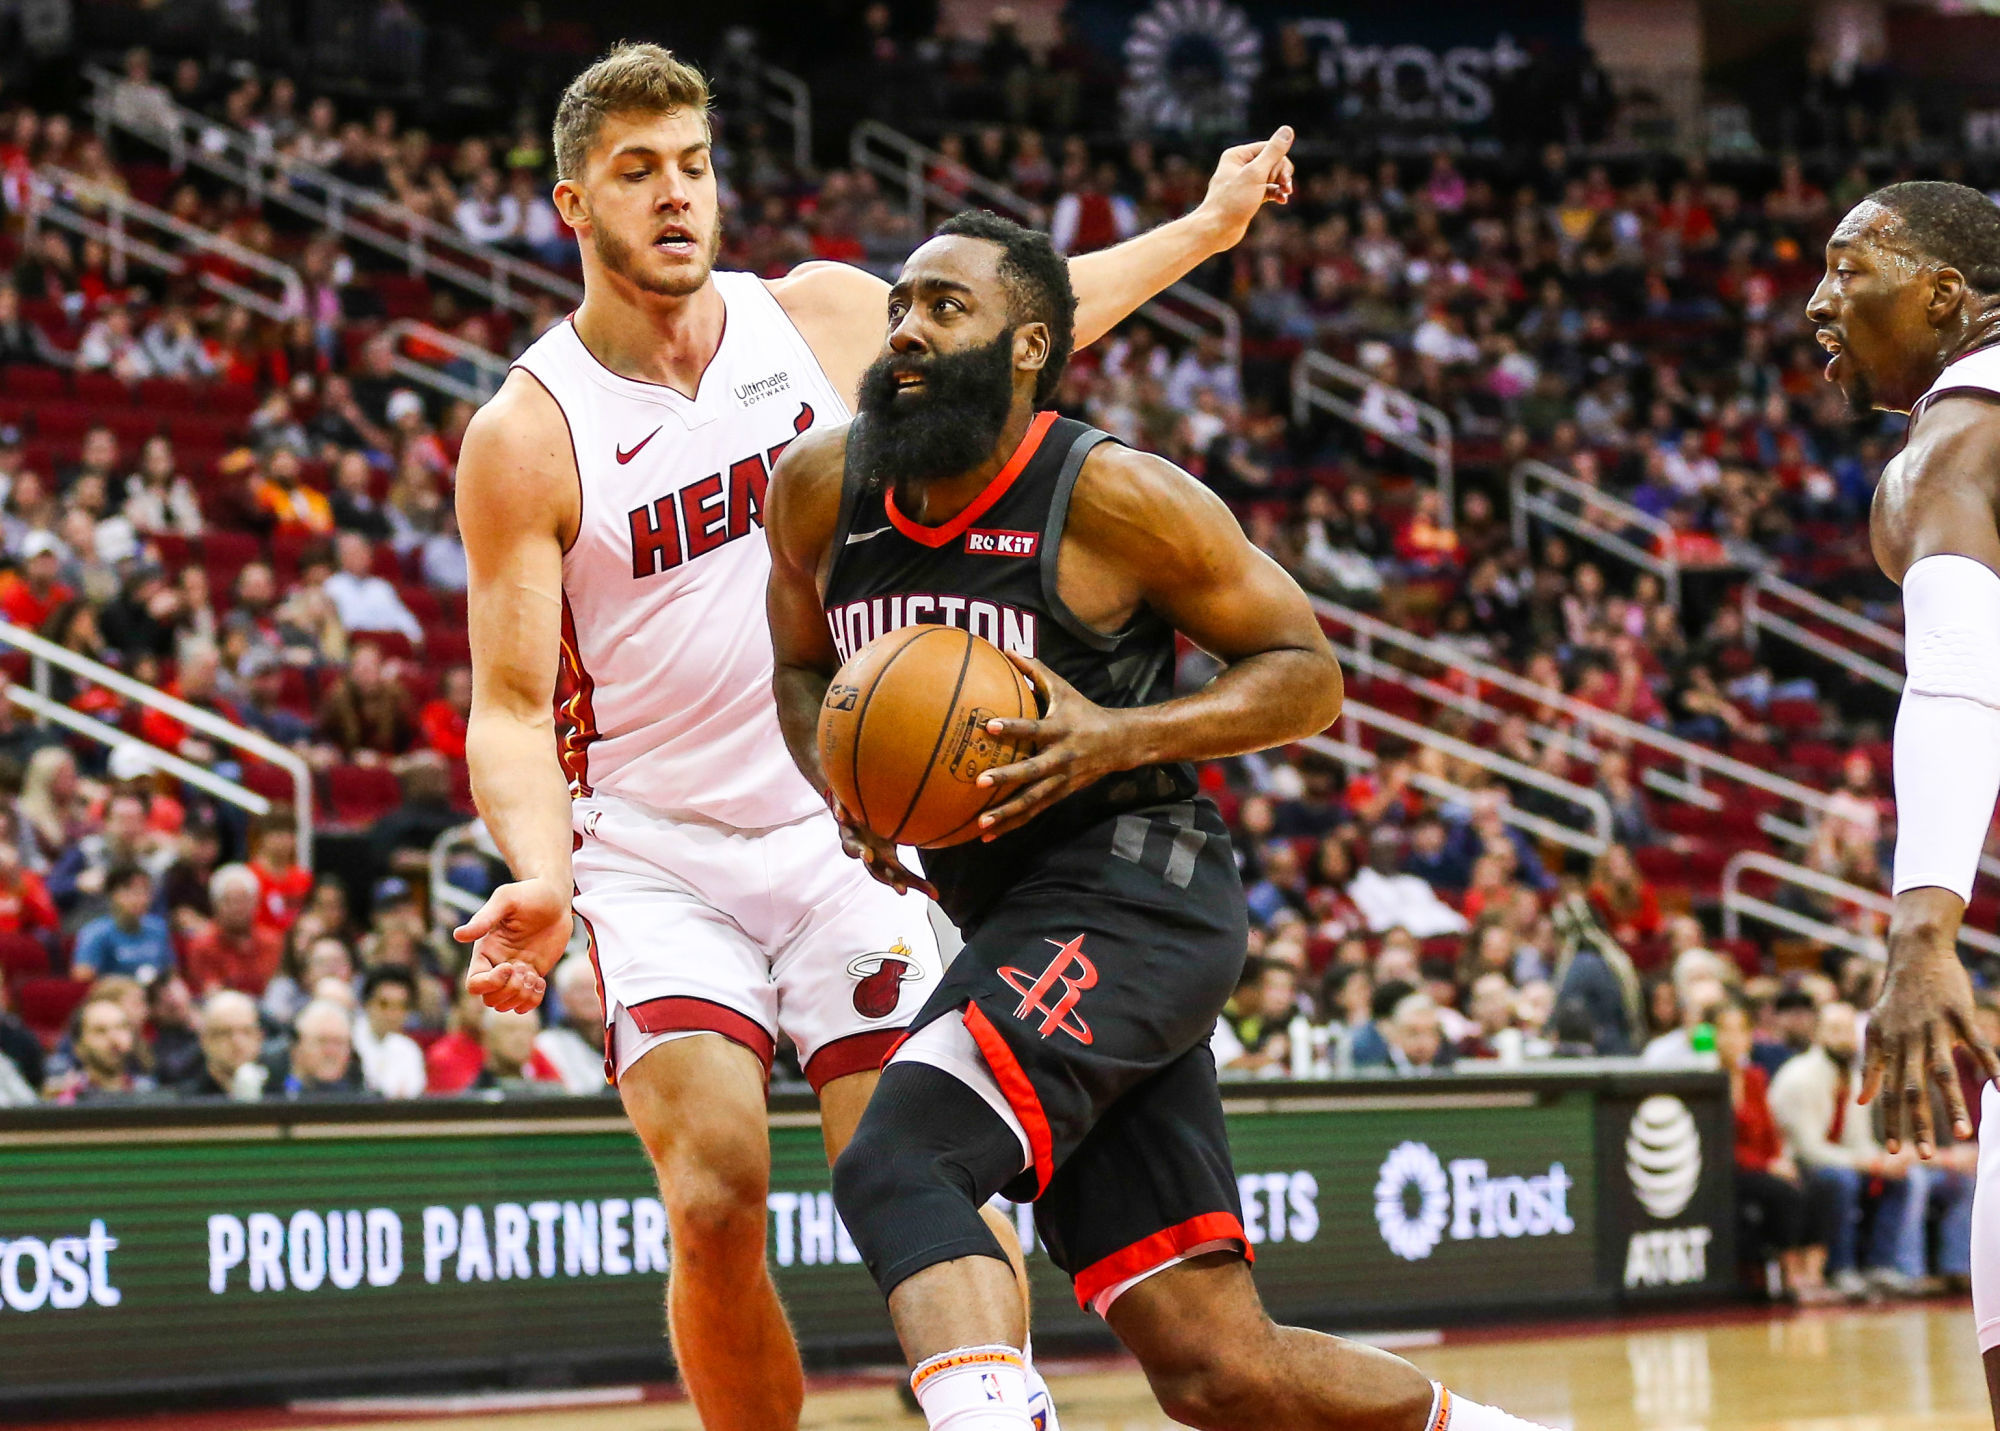 Nov 27, 2019; Houston, TX, USA; Houston Rockets guard James Harden (13) drives with the ball as Miami Heat forward Meyers Leonard (0) defends during the first quarter at Toyota Center. Mandatory Credit: Troy Taormina-USA TODAY Sports/Sipa USA 

Photo by Icon Sport - James HARDEN - Meyers LEONARD - Toyota Center - Houston (Etats Unis)